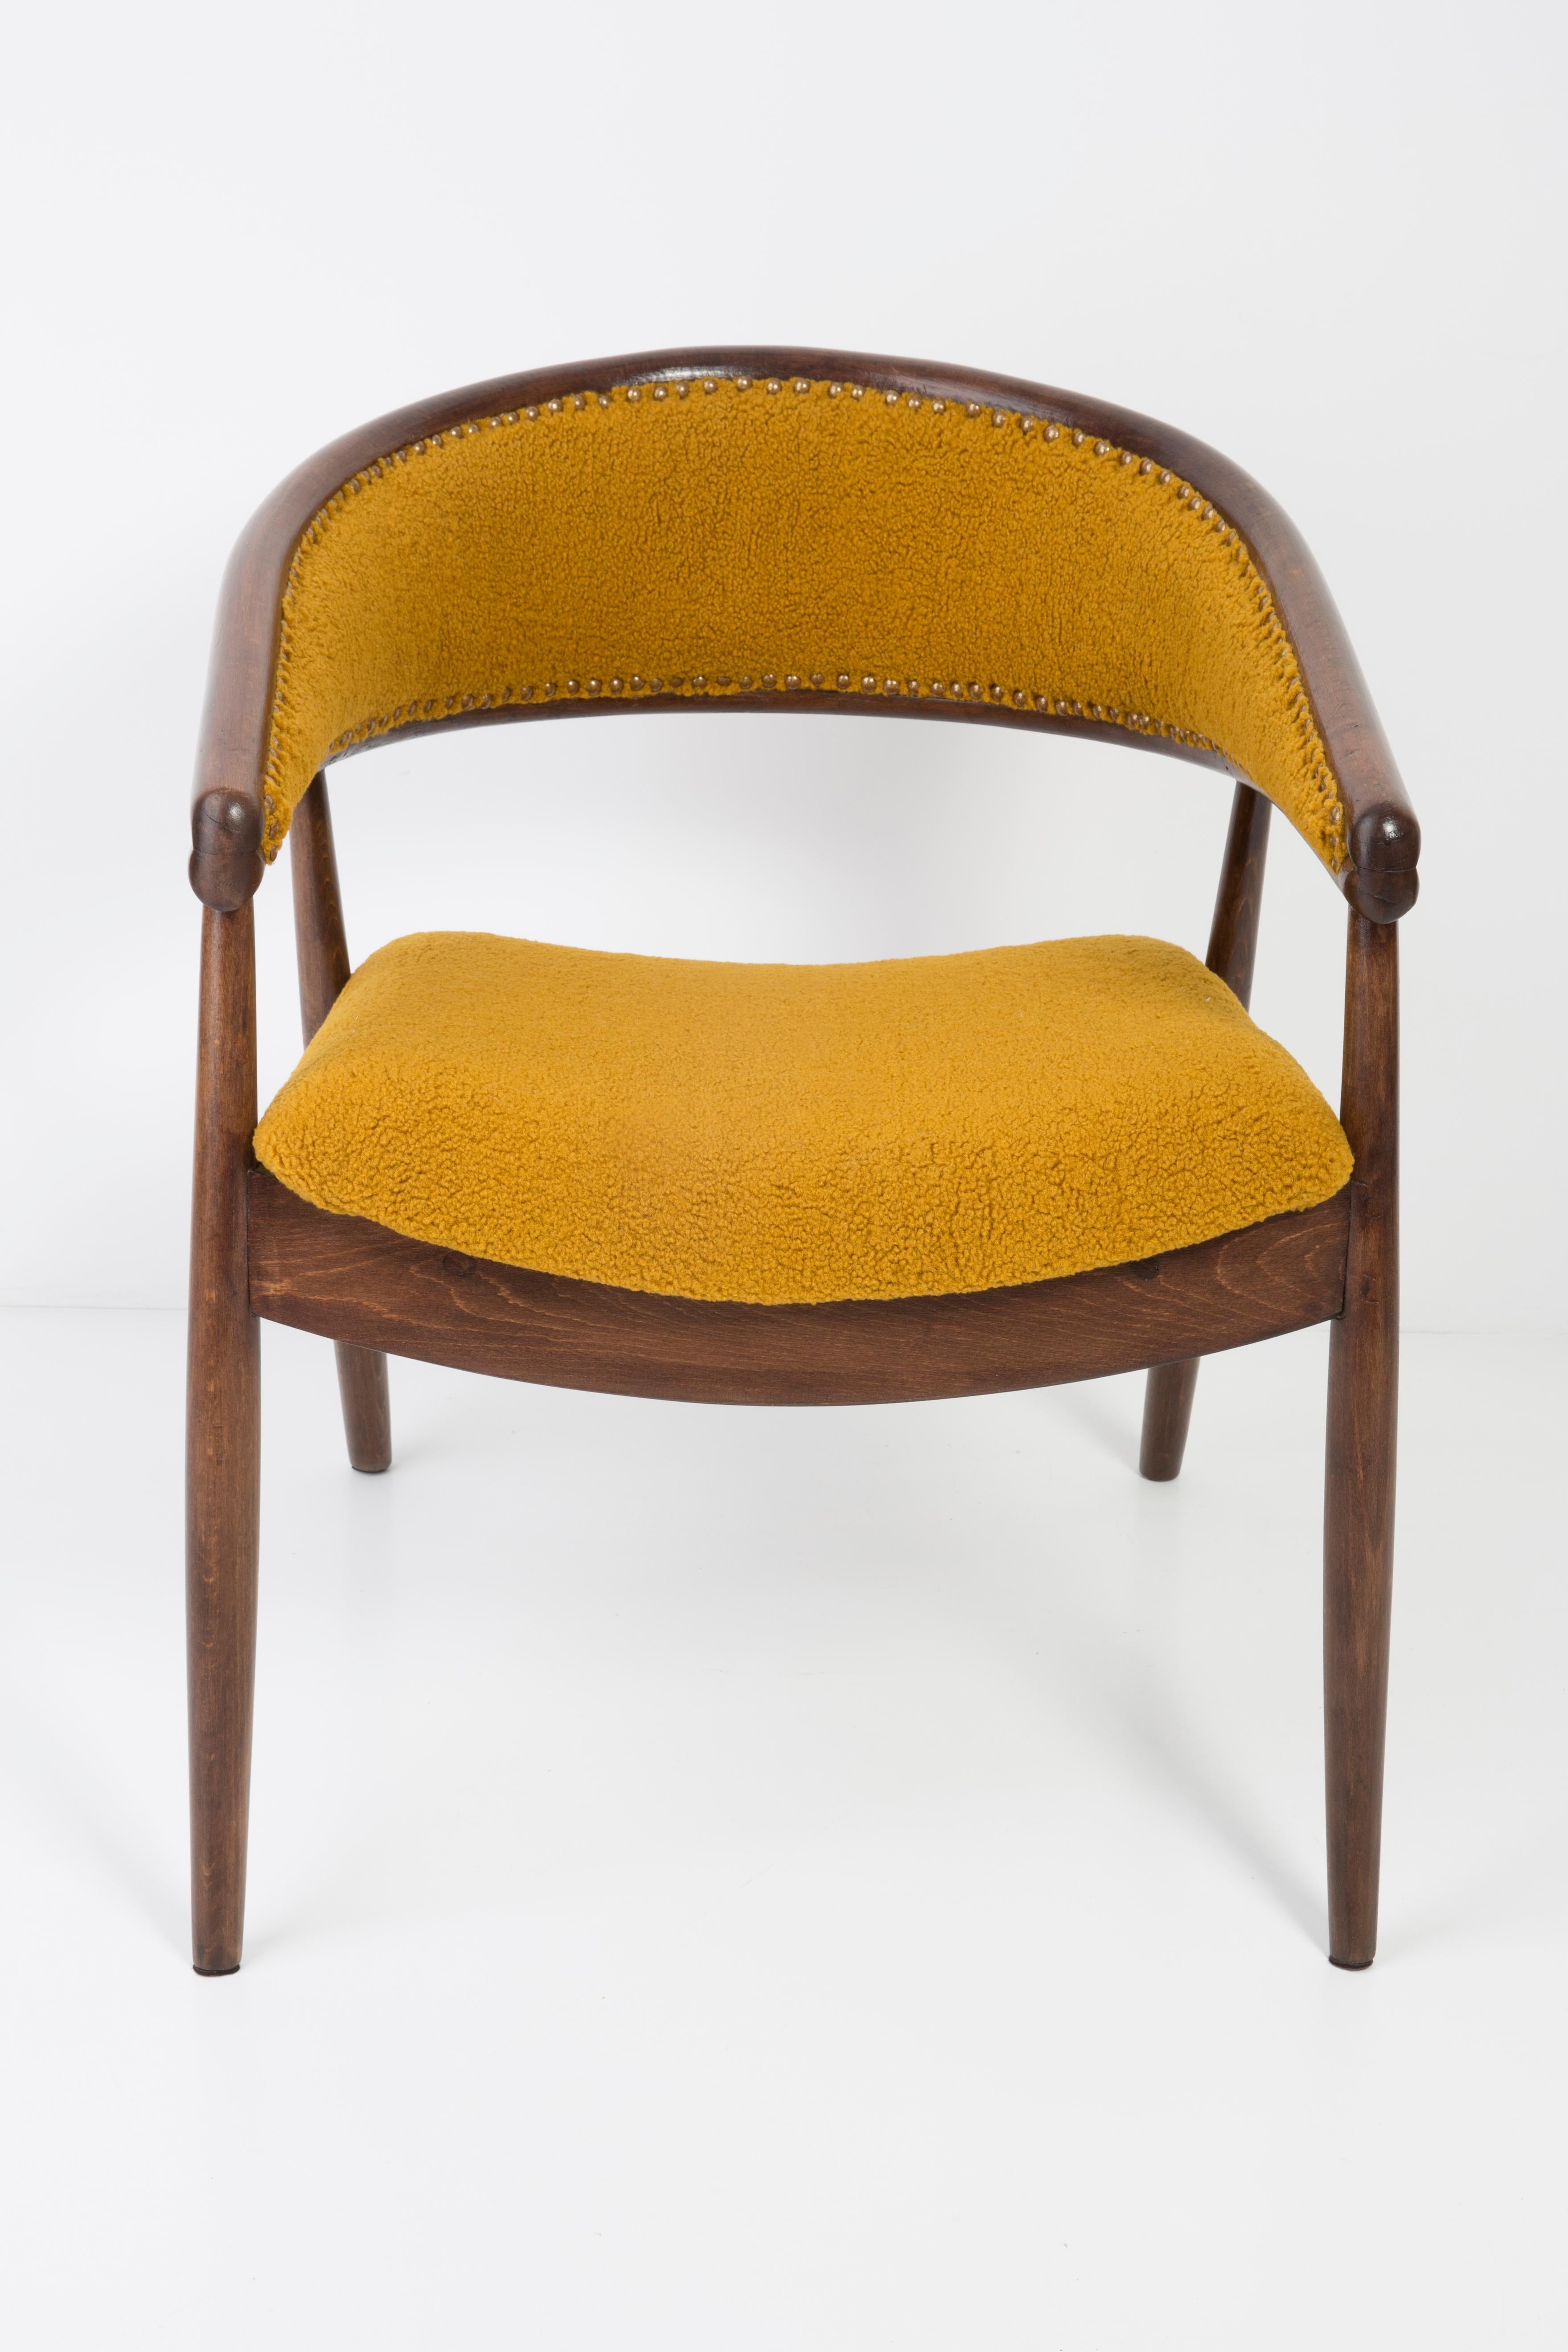 Set of Two James Mont Bent Beech Armchairs, Yellow Ochra Boucle, 1960s For Sale 5